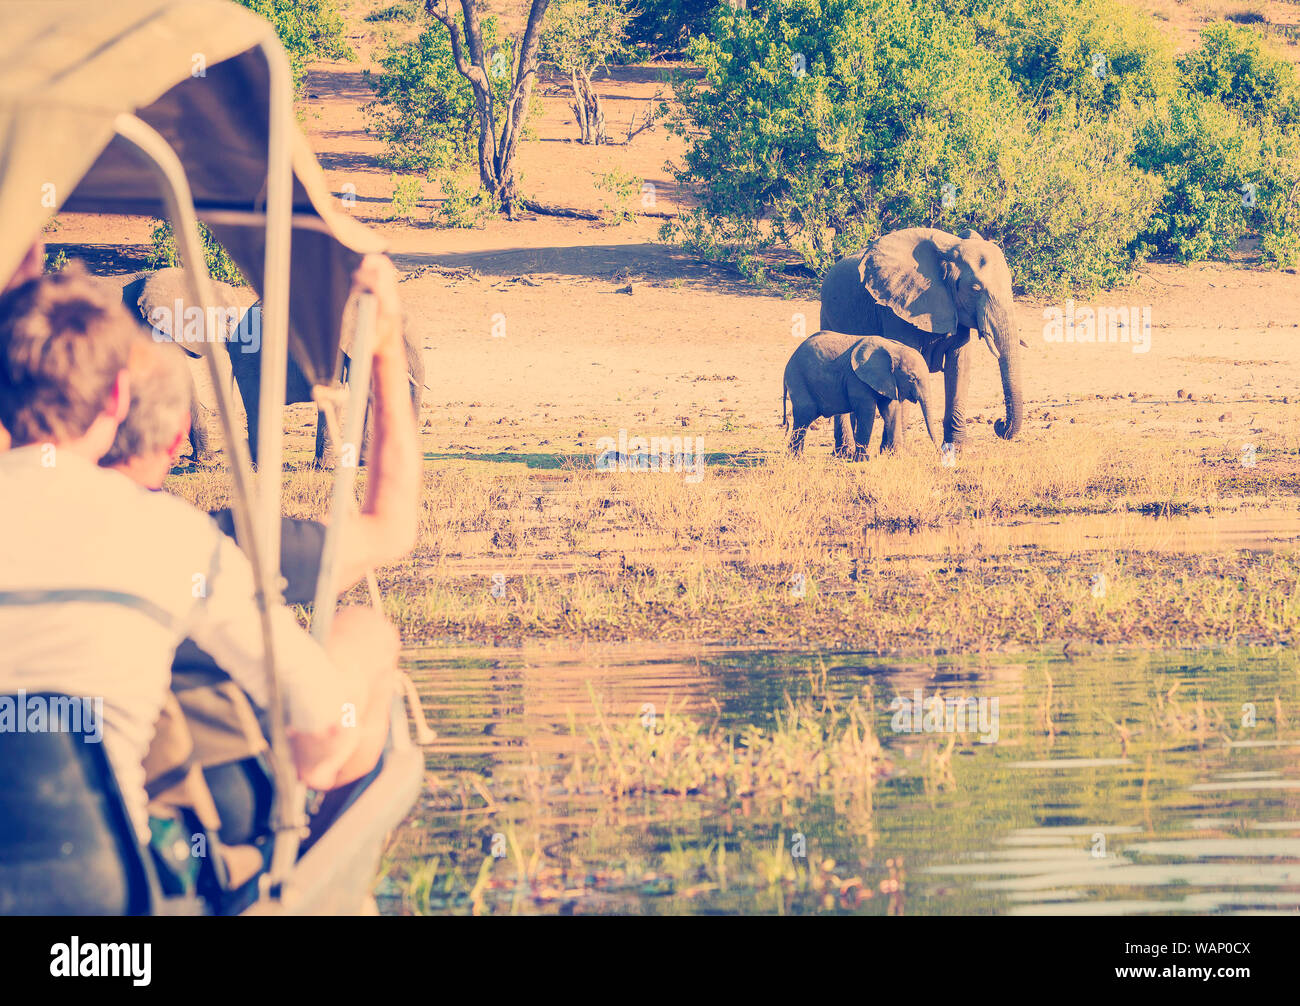 Tourists watching an elephant while on safari in Botswana, Africa with retro Instagram style filter effect Stock Photo